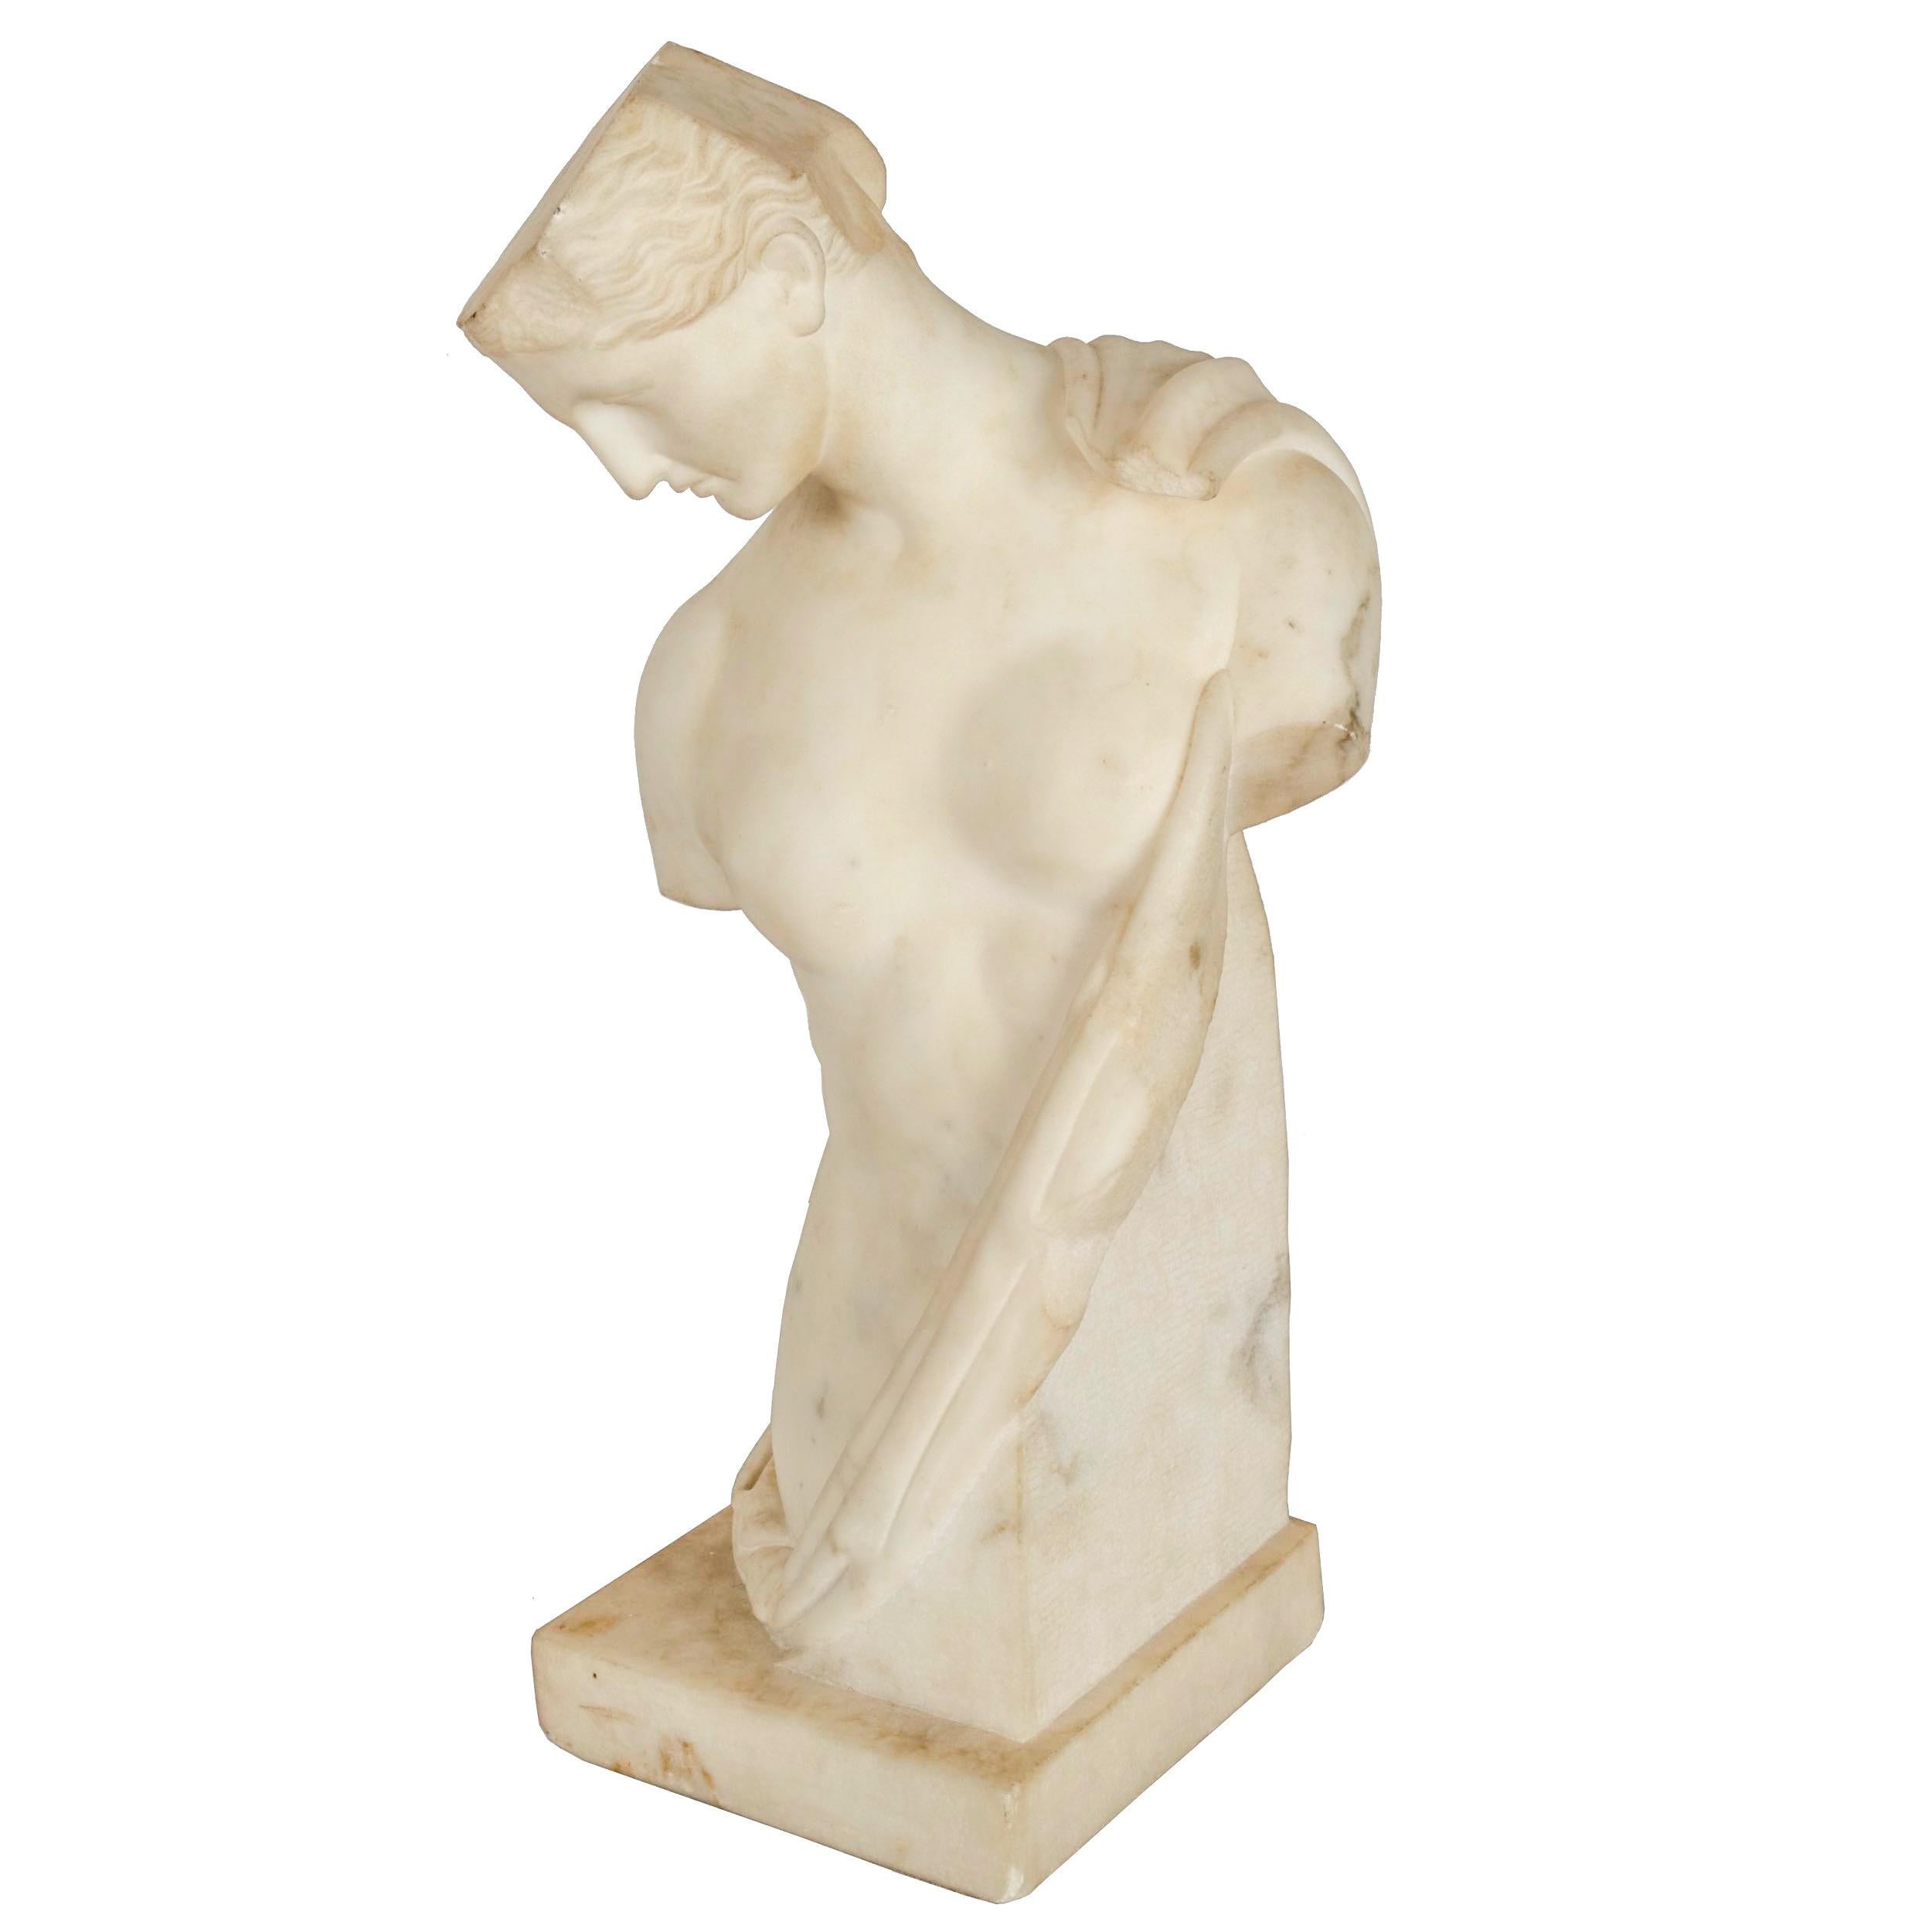 A finely chiseled marble sculpture of a goddess draped in a loose garb, it is a product of the Grand Tour and likely dates to the third quarter of the 19th century. The ancient sculpture that inspired this model was found in the amphitheater of